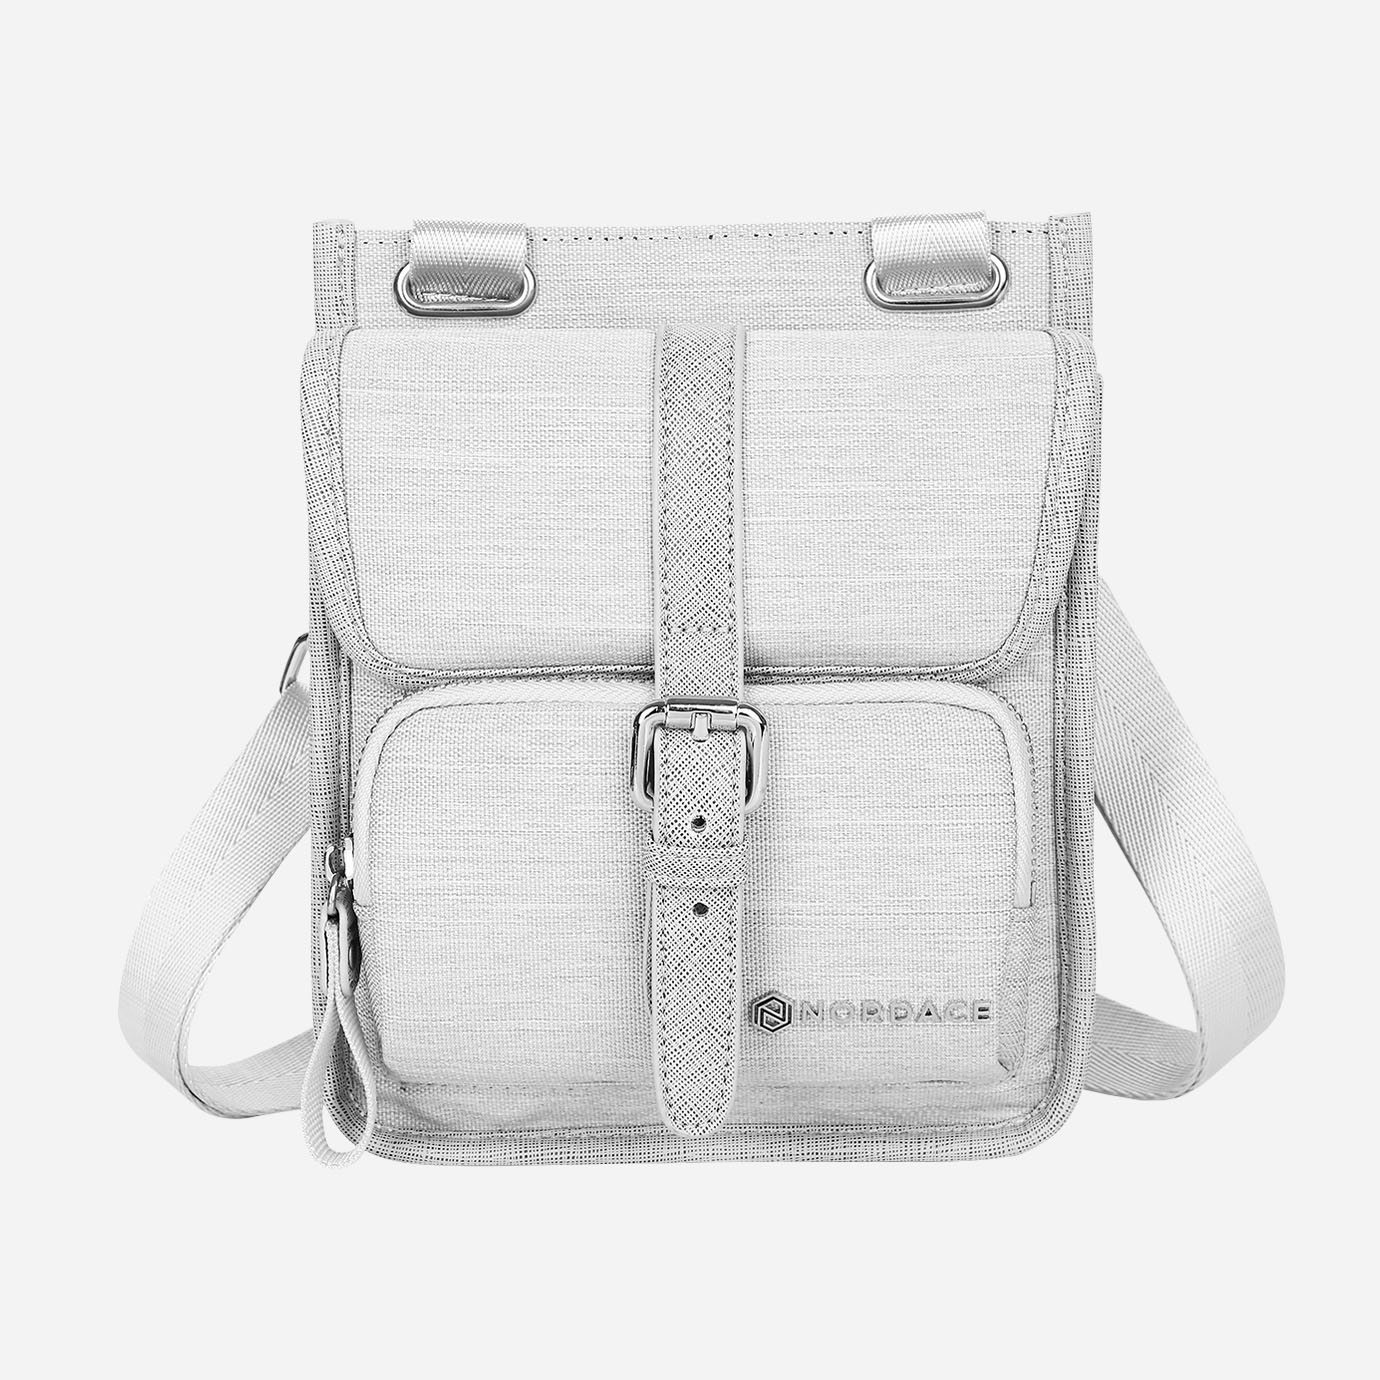 Nordace Bags | Comino Neck Pouch-Gray